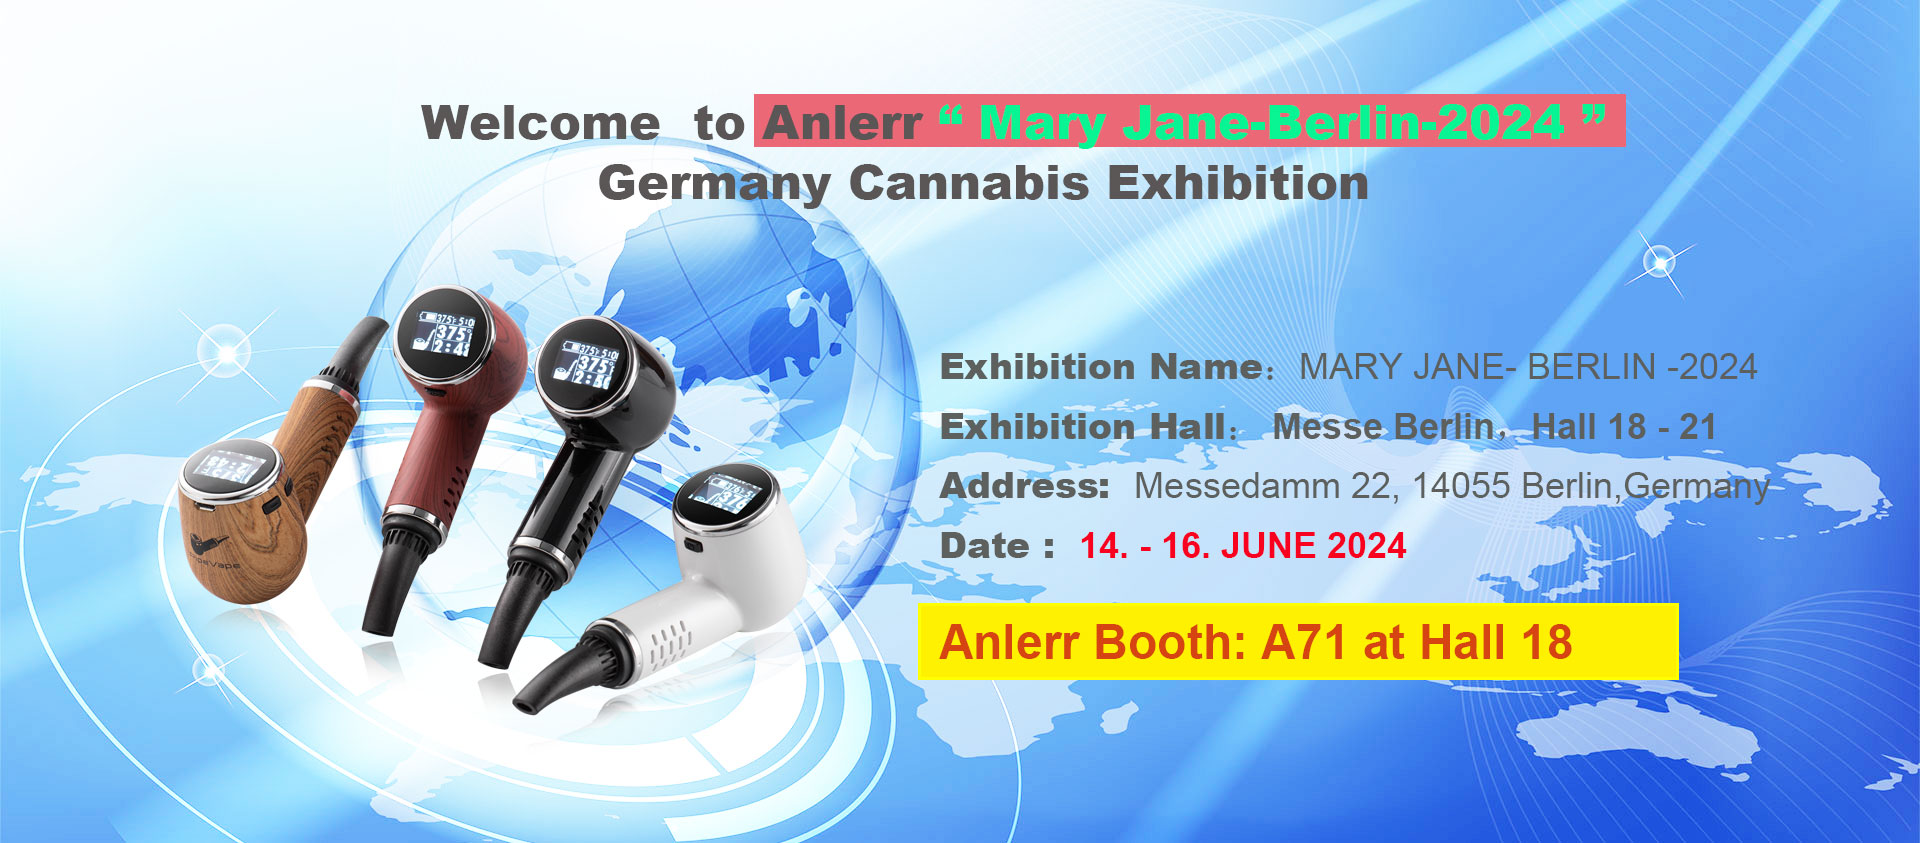 Germany Cannabis Exhibition June 